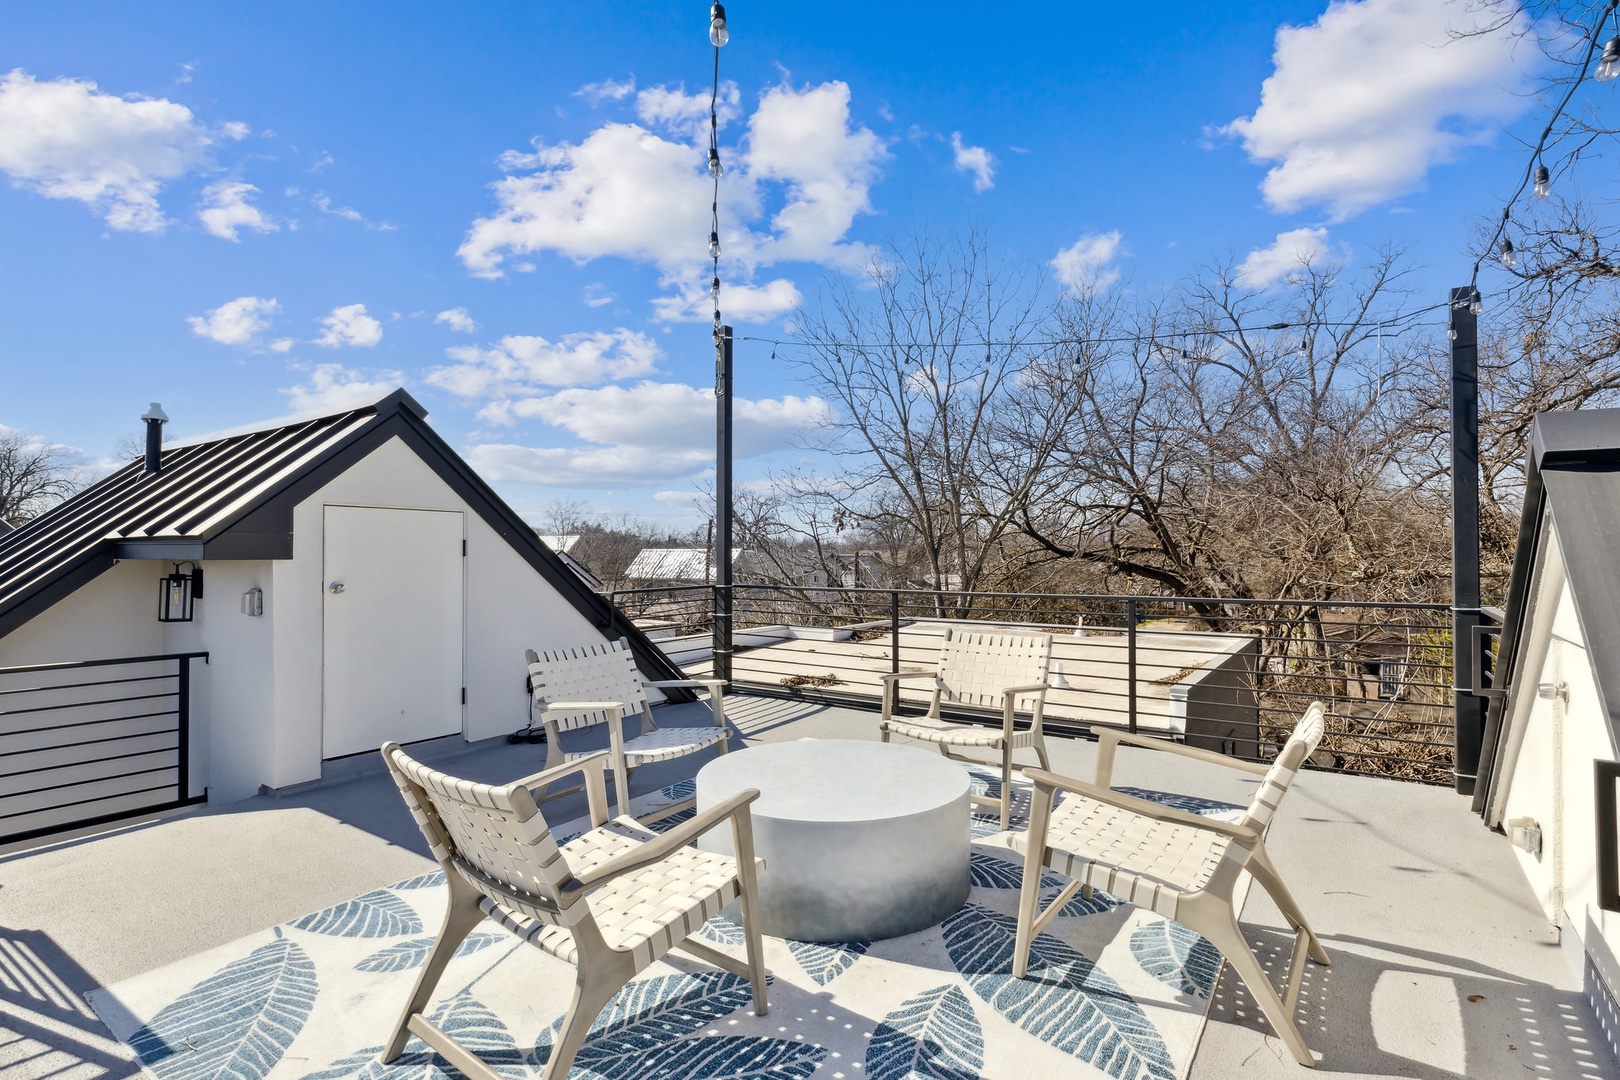 Relax on the rooftop deck with outdoor seating